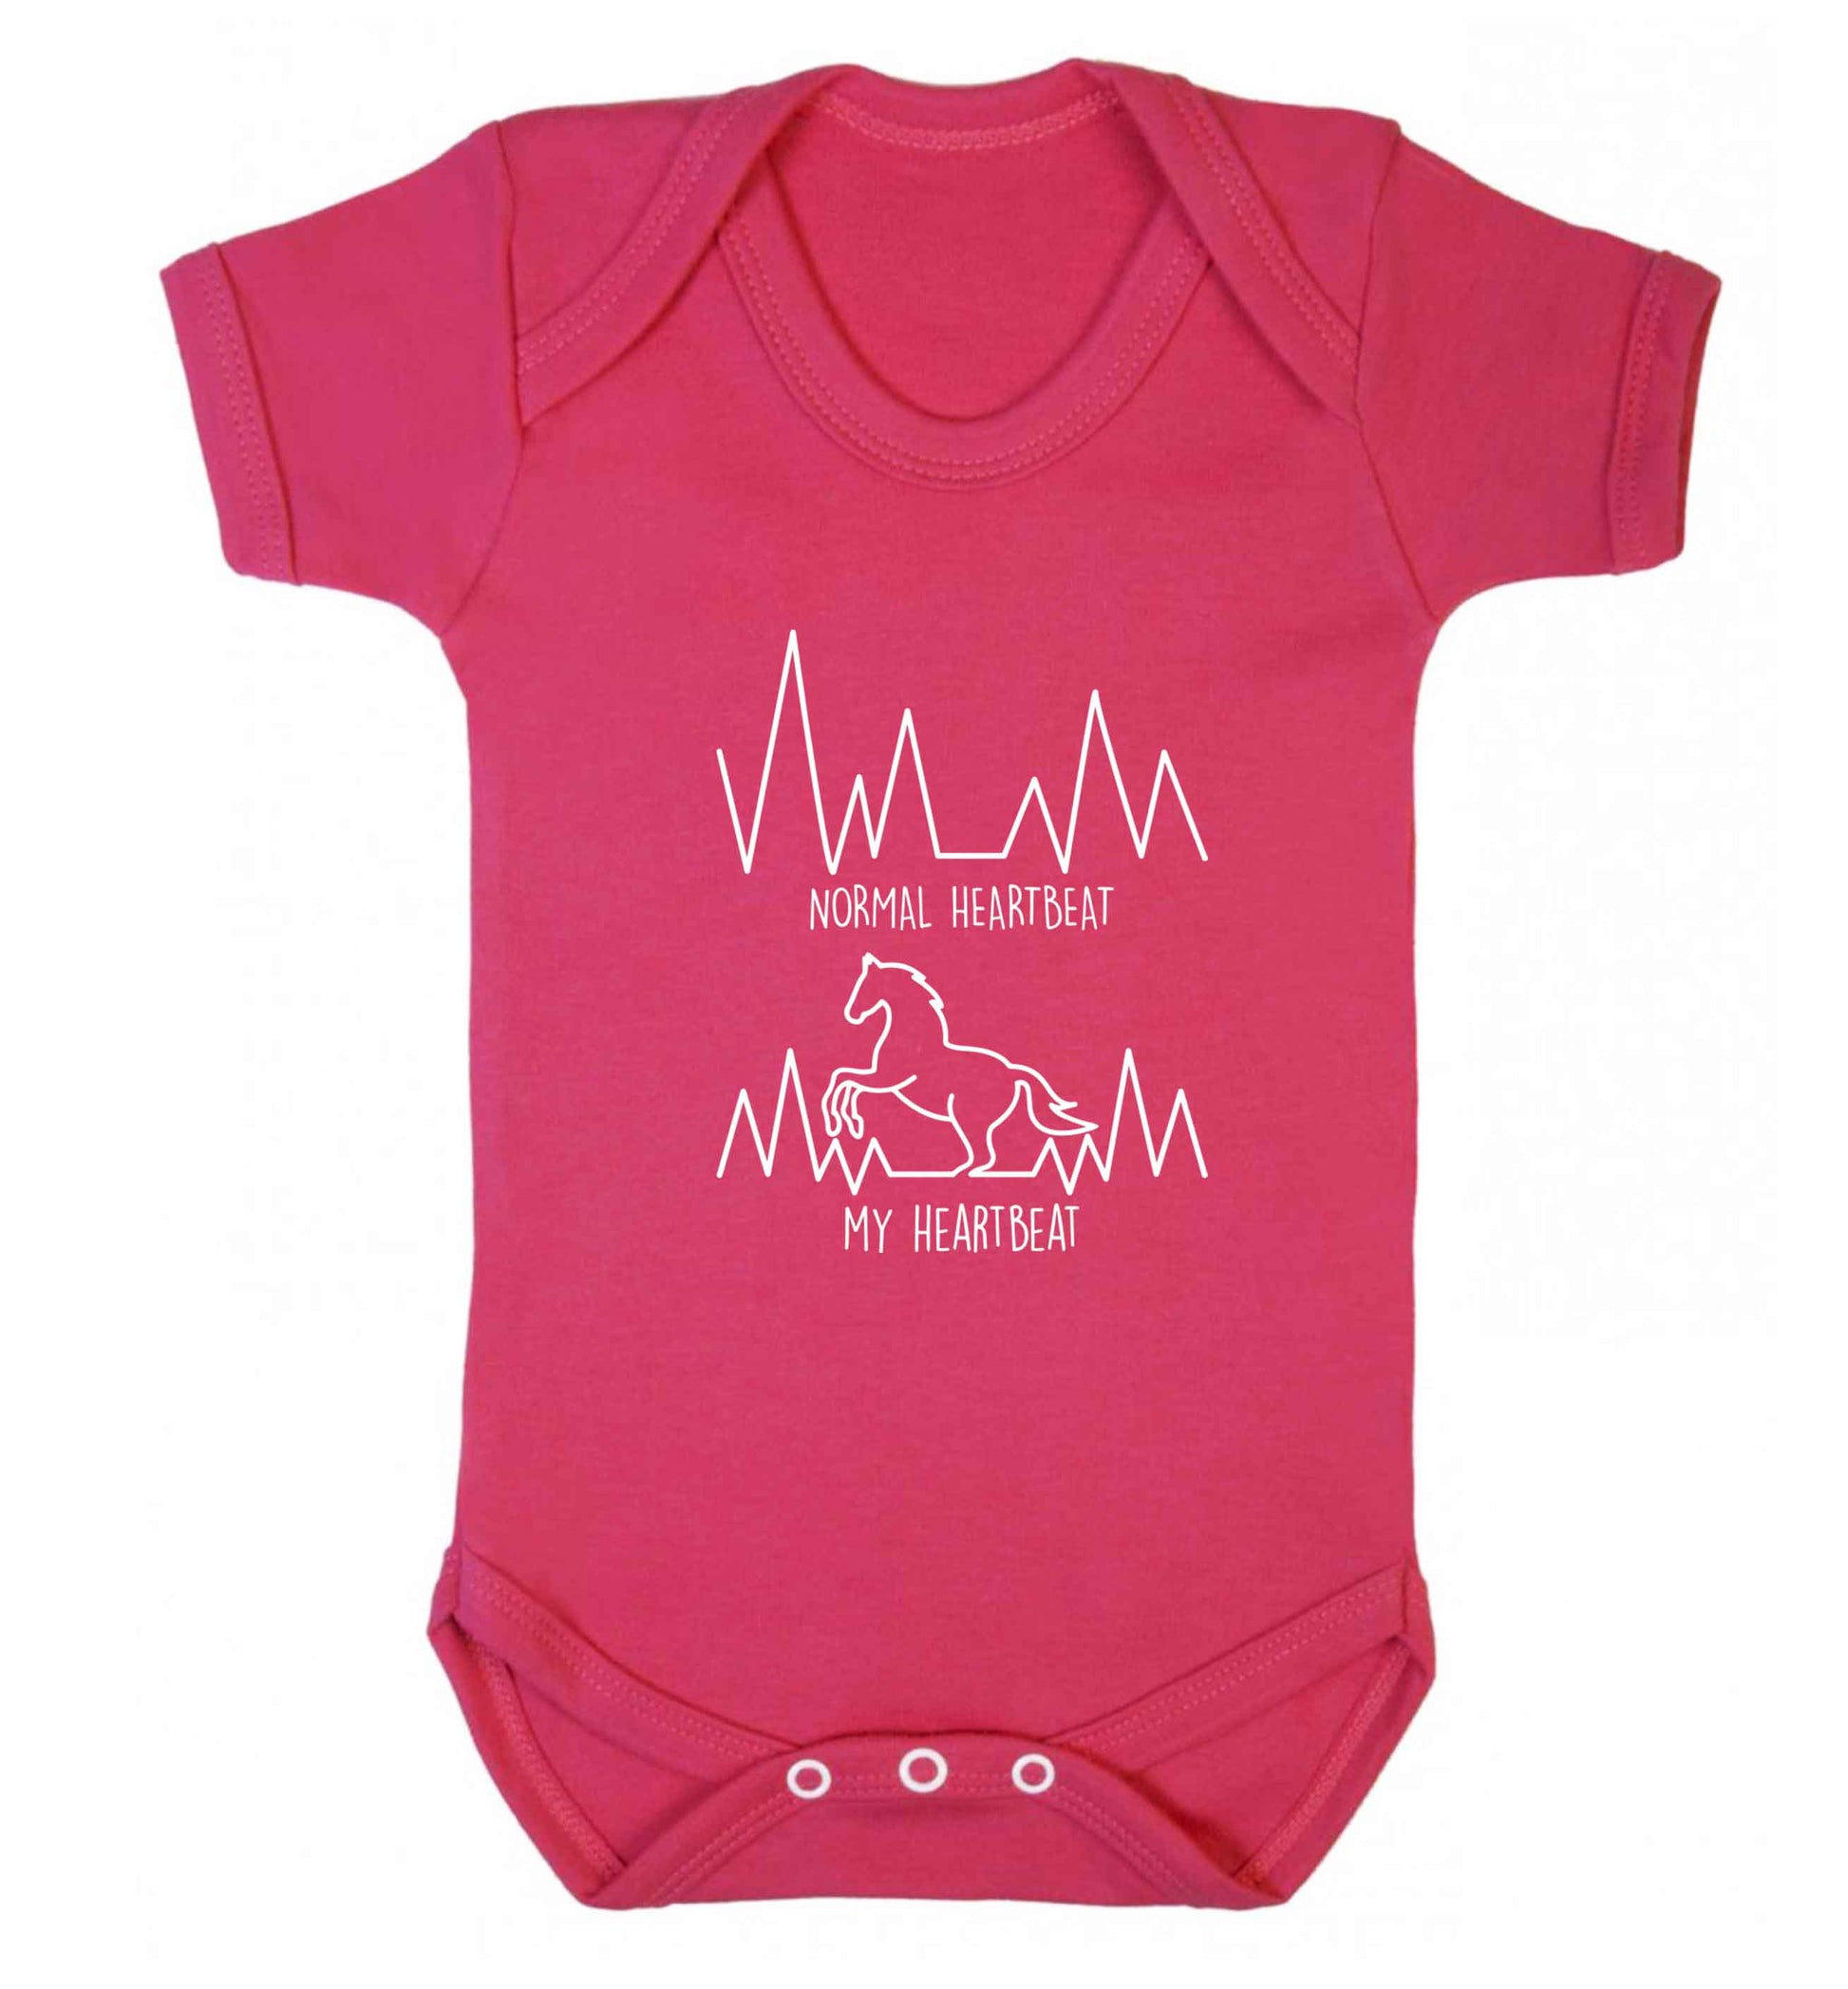 Horse - Normal heartbeat my heartbeat baby vest dark pink 18-24 months